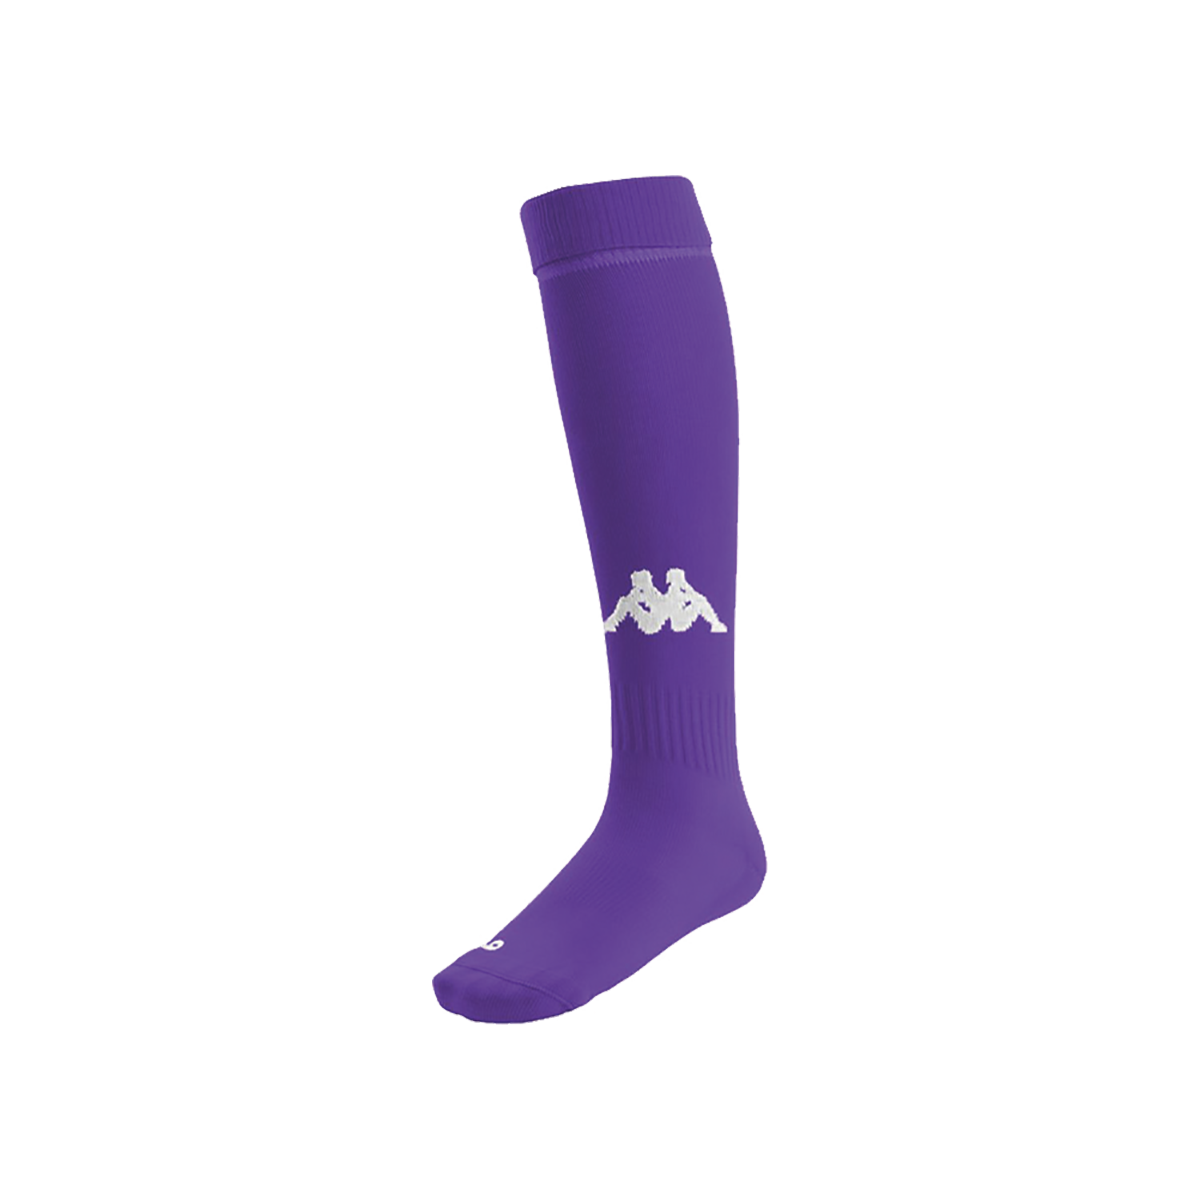 Chaussettes Football Penao Violet Unisexe - Image 1